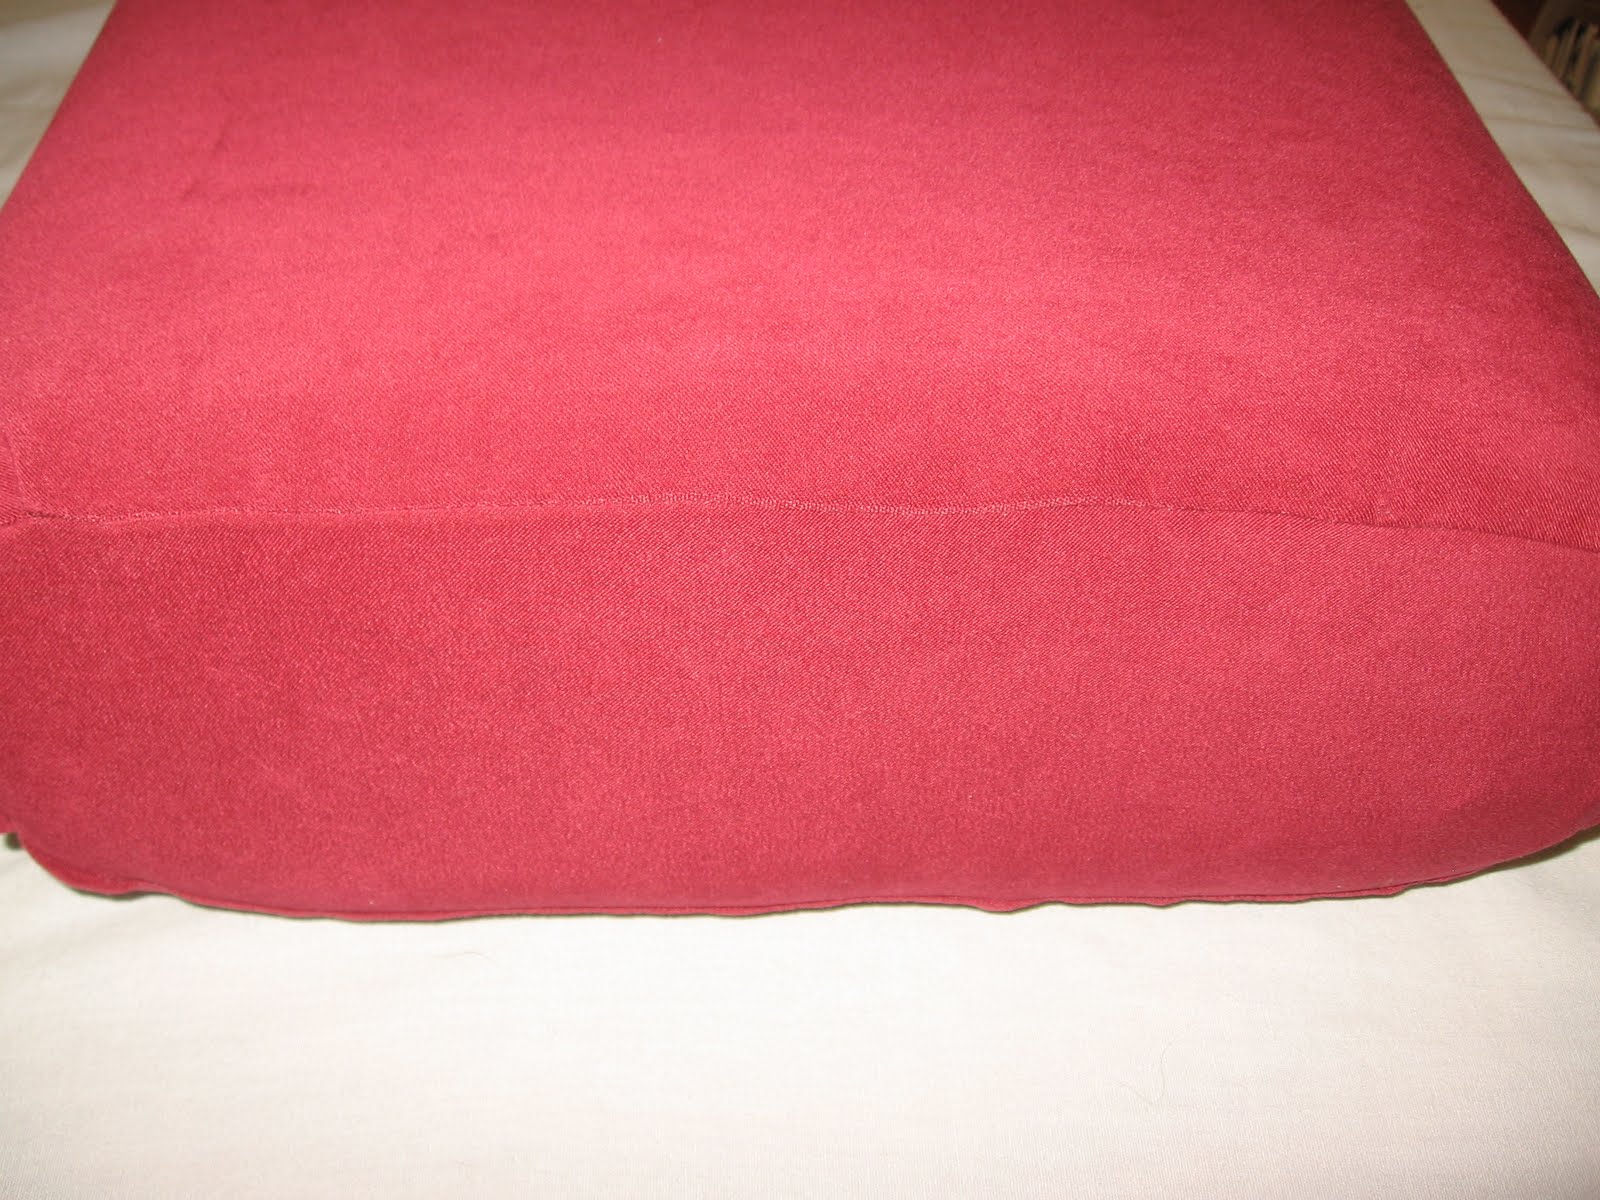 Updating Couch Cushion Covers/Minimal Sewing Skill Required – Our